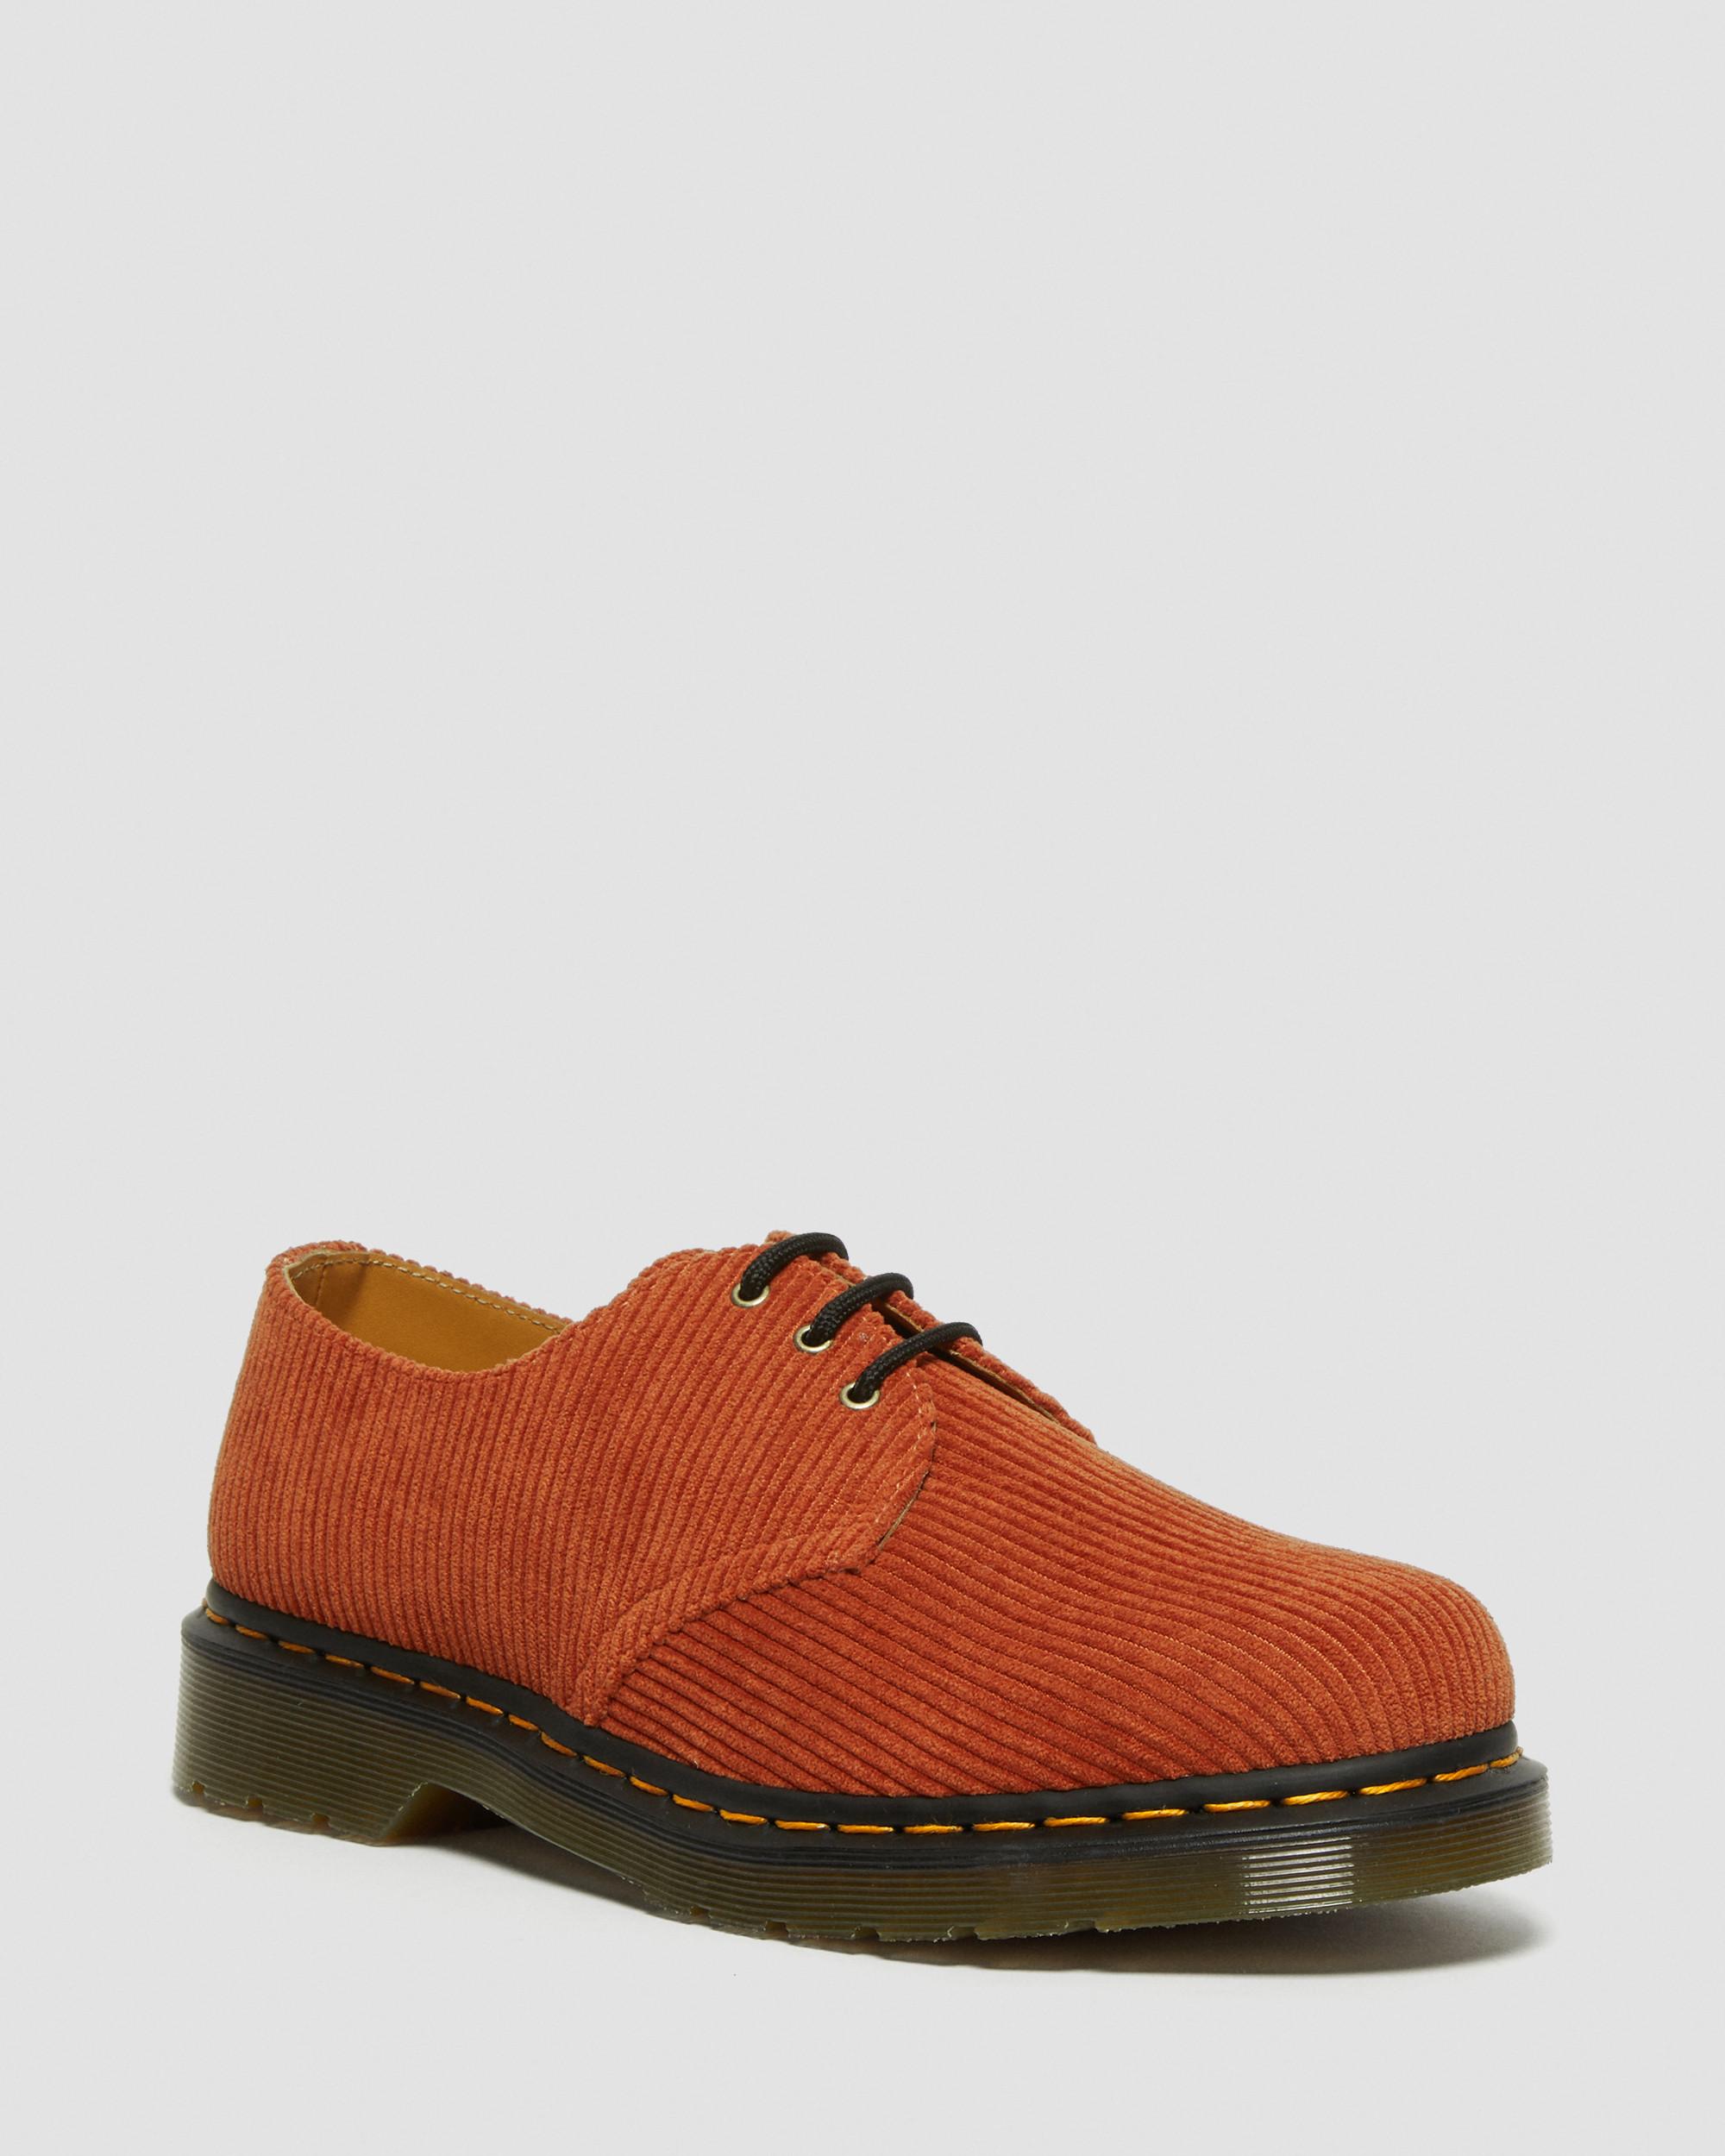 1461 Corduroy Oxford Shoes in Tan | Dr. Martens